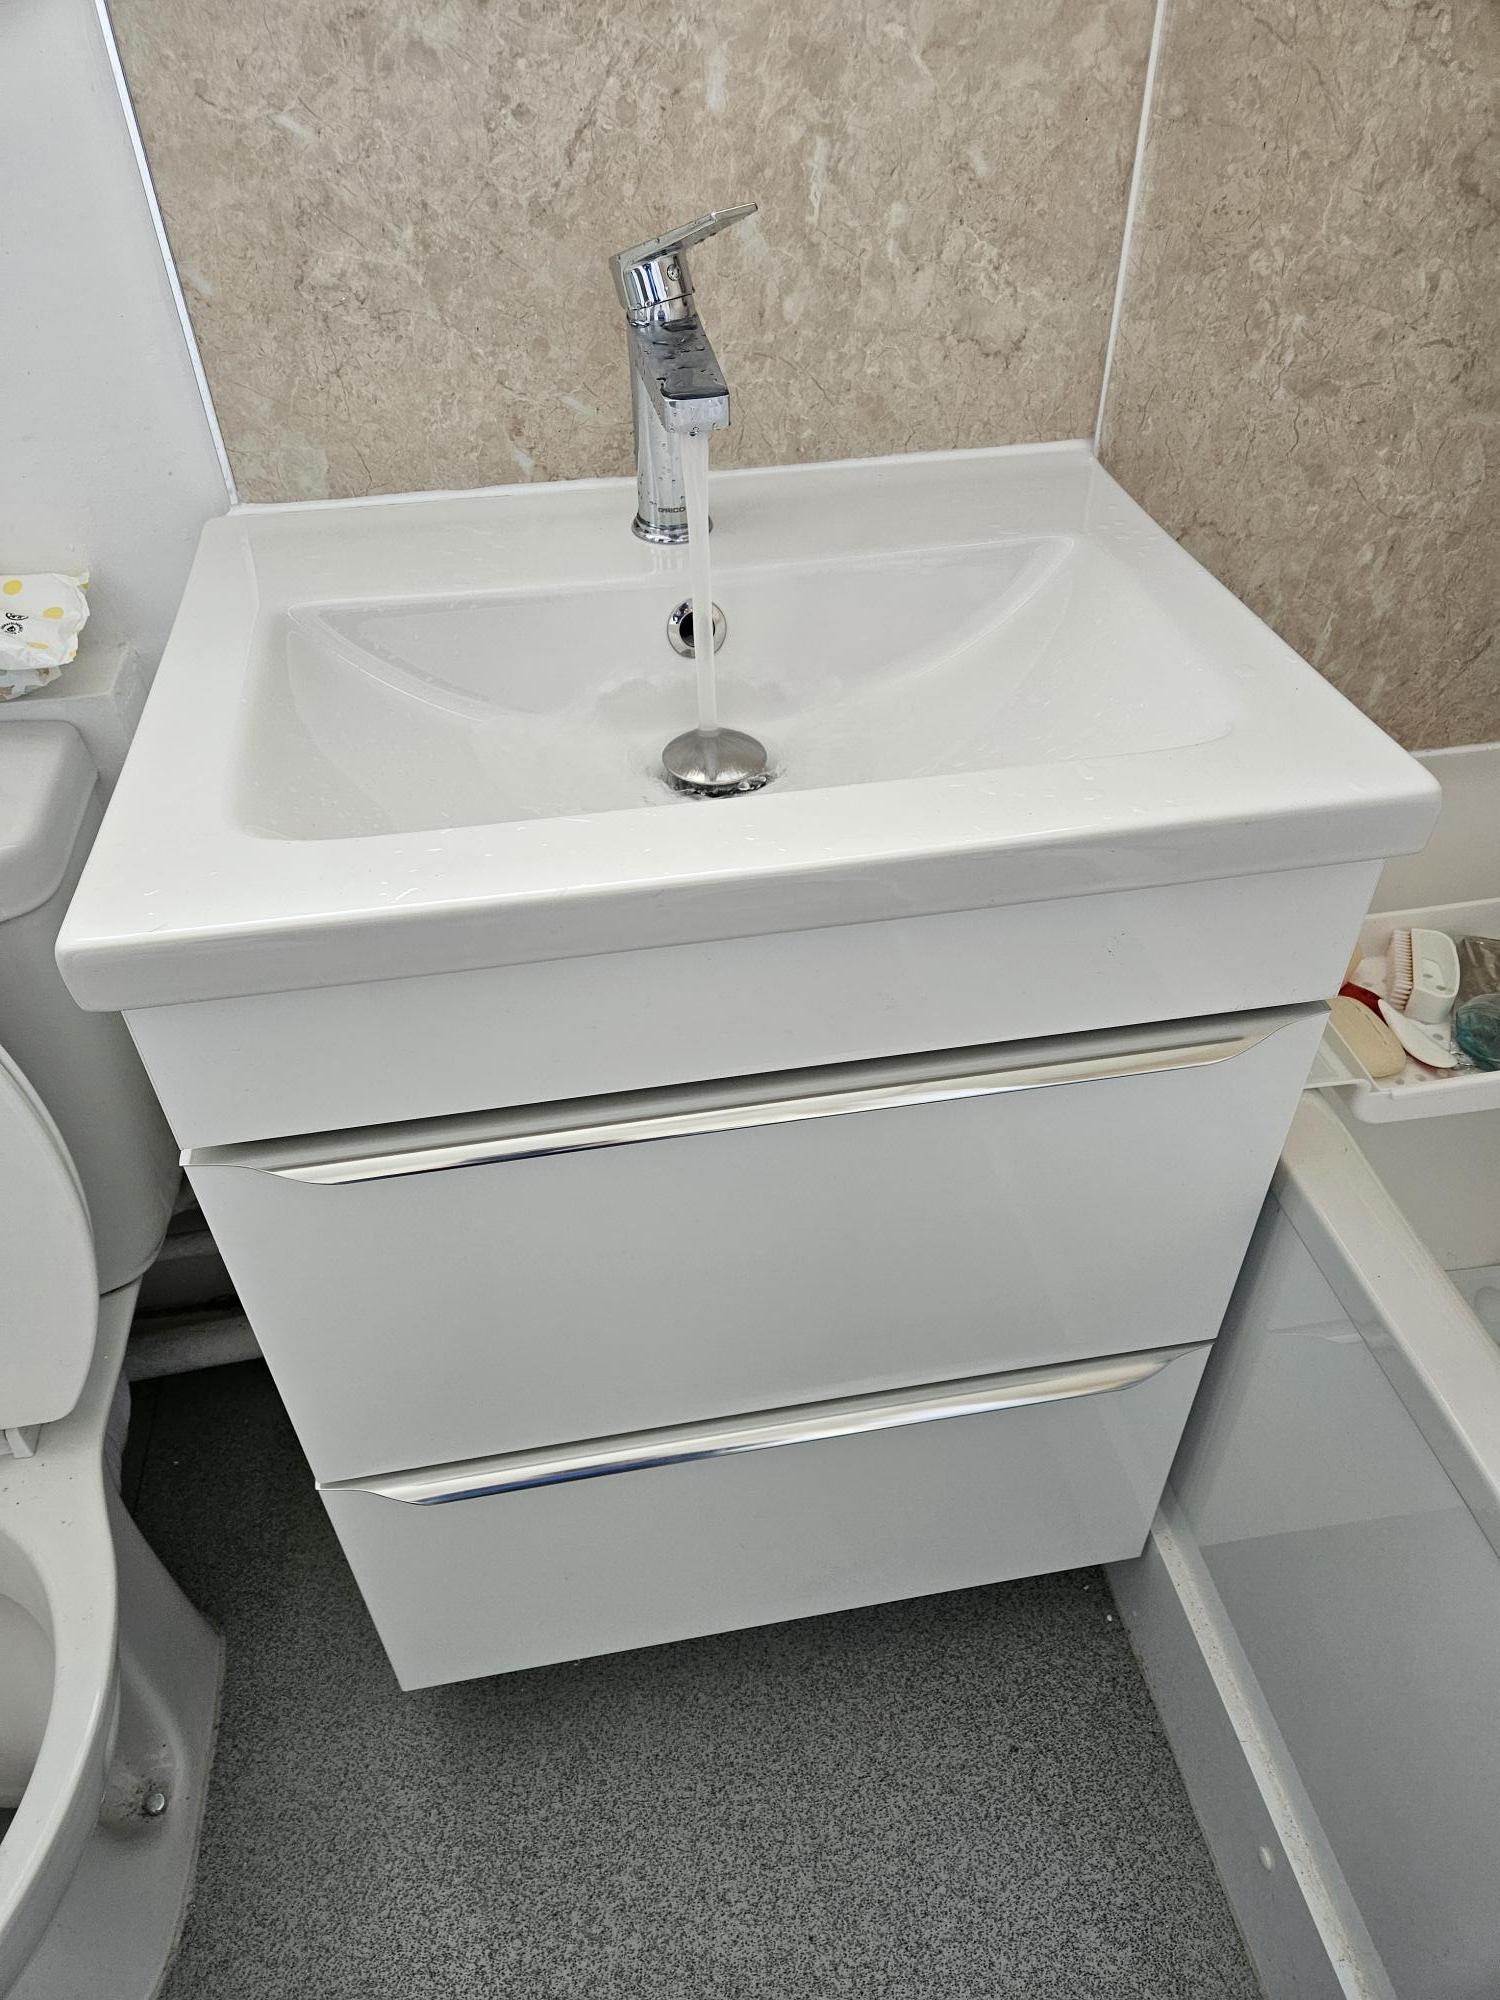 Sink and vanity unit with drawers